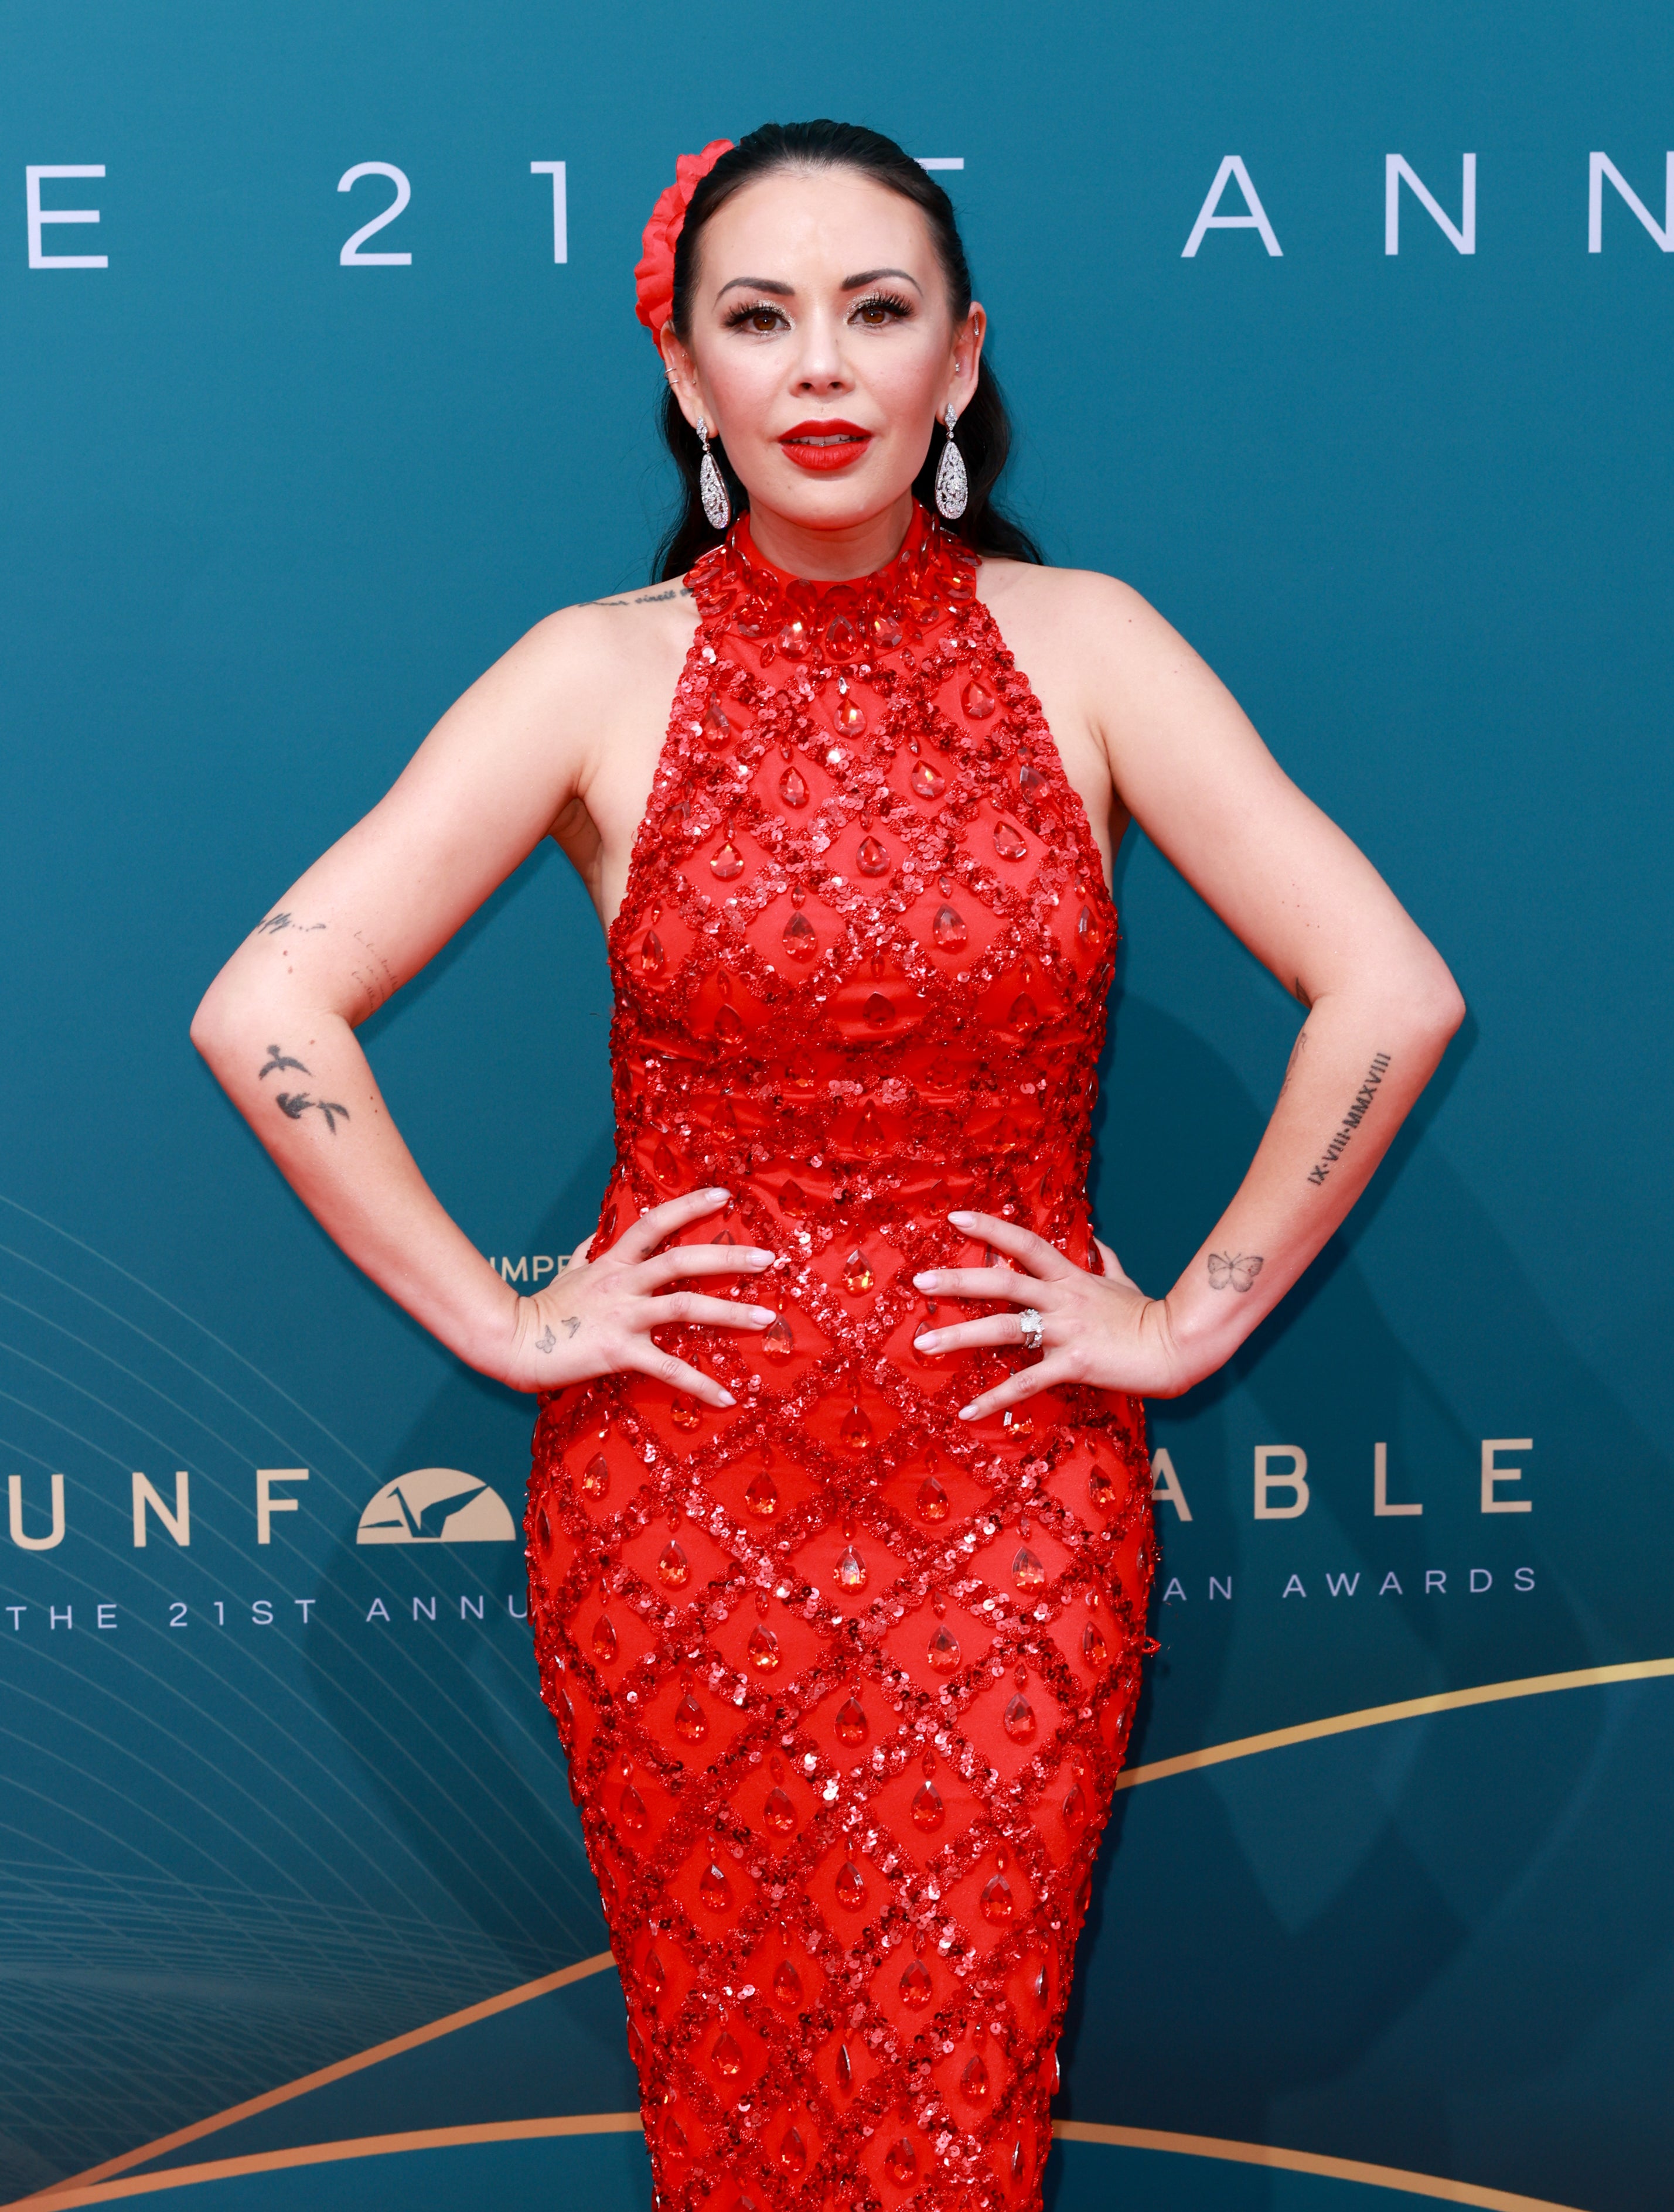 Janel Parrish in an embellished red gown with hands on hips, standing against event backdrop